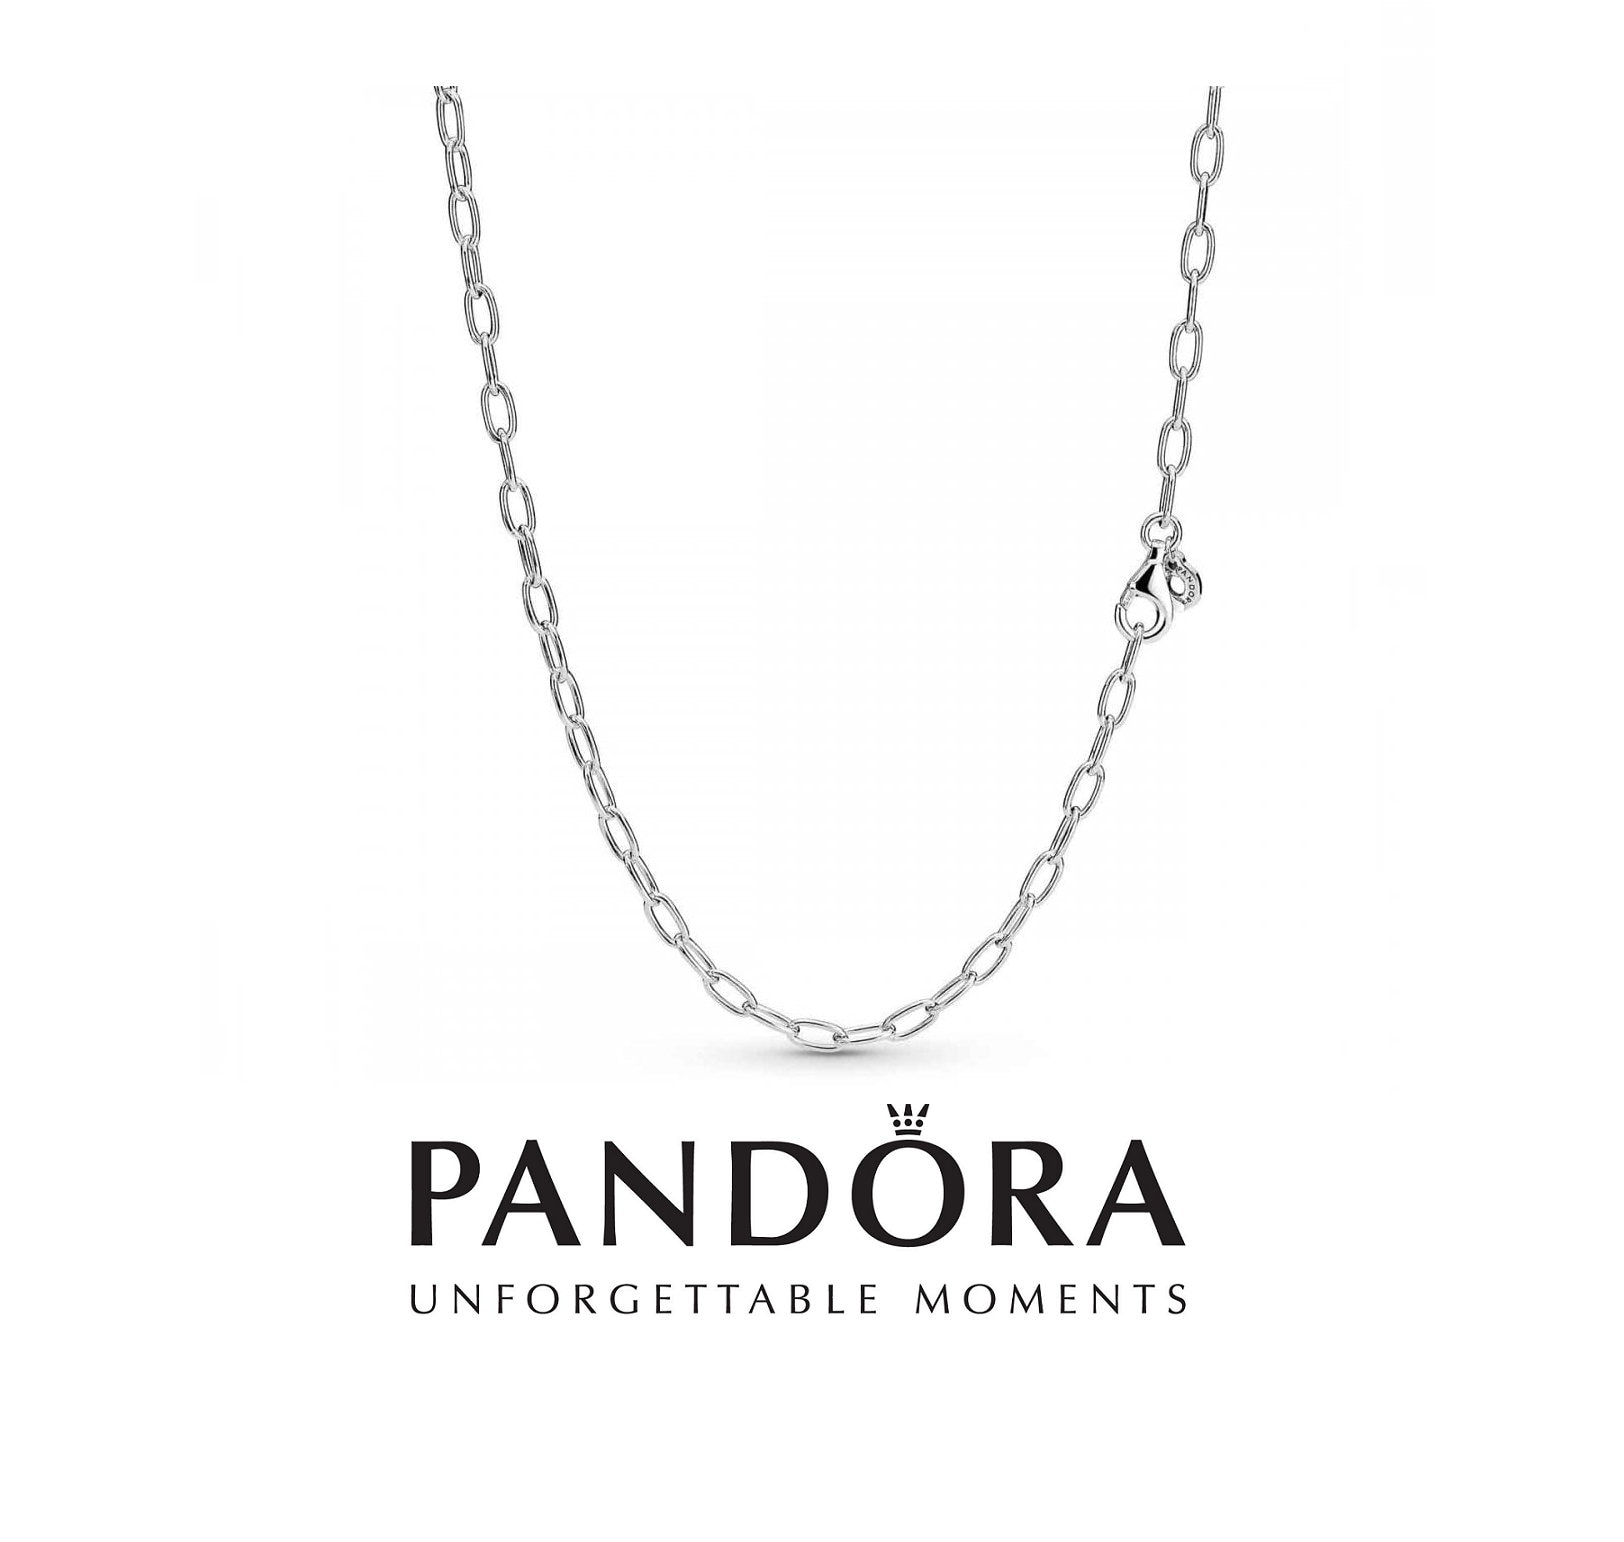 PANDORA Moments Snake Chain Sterling Silver Necklace with 4 Charms - 45cm |  eBay